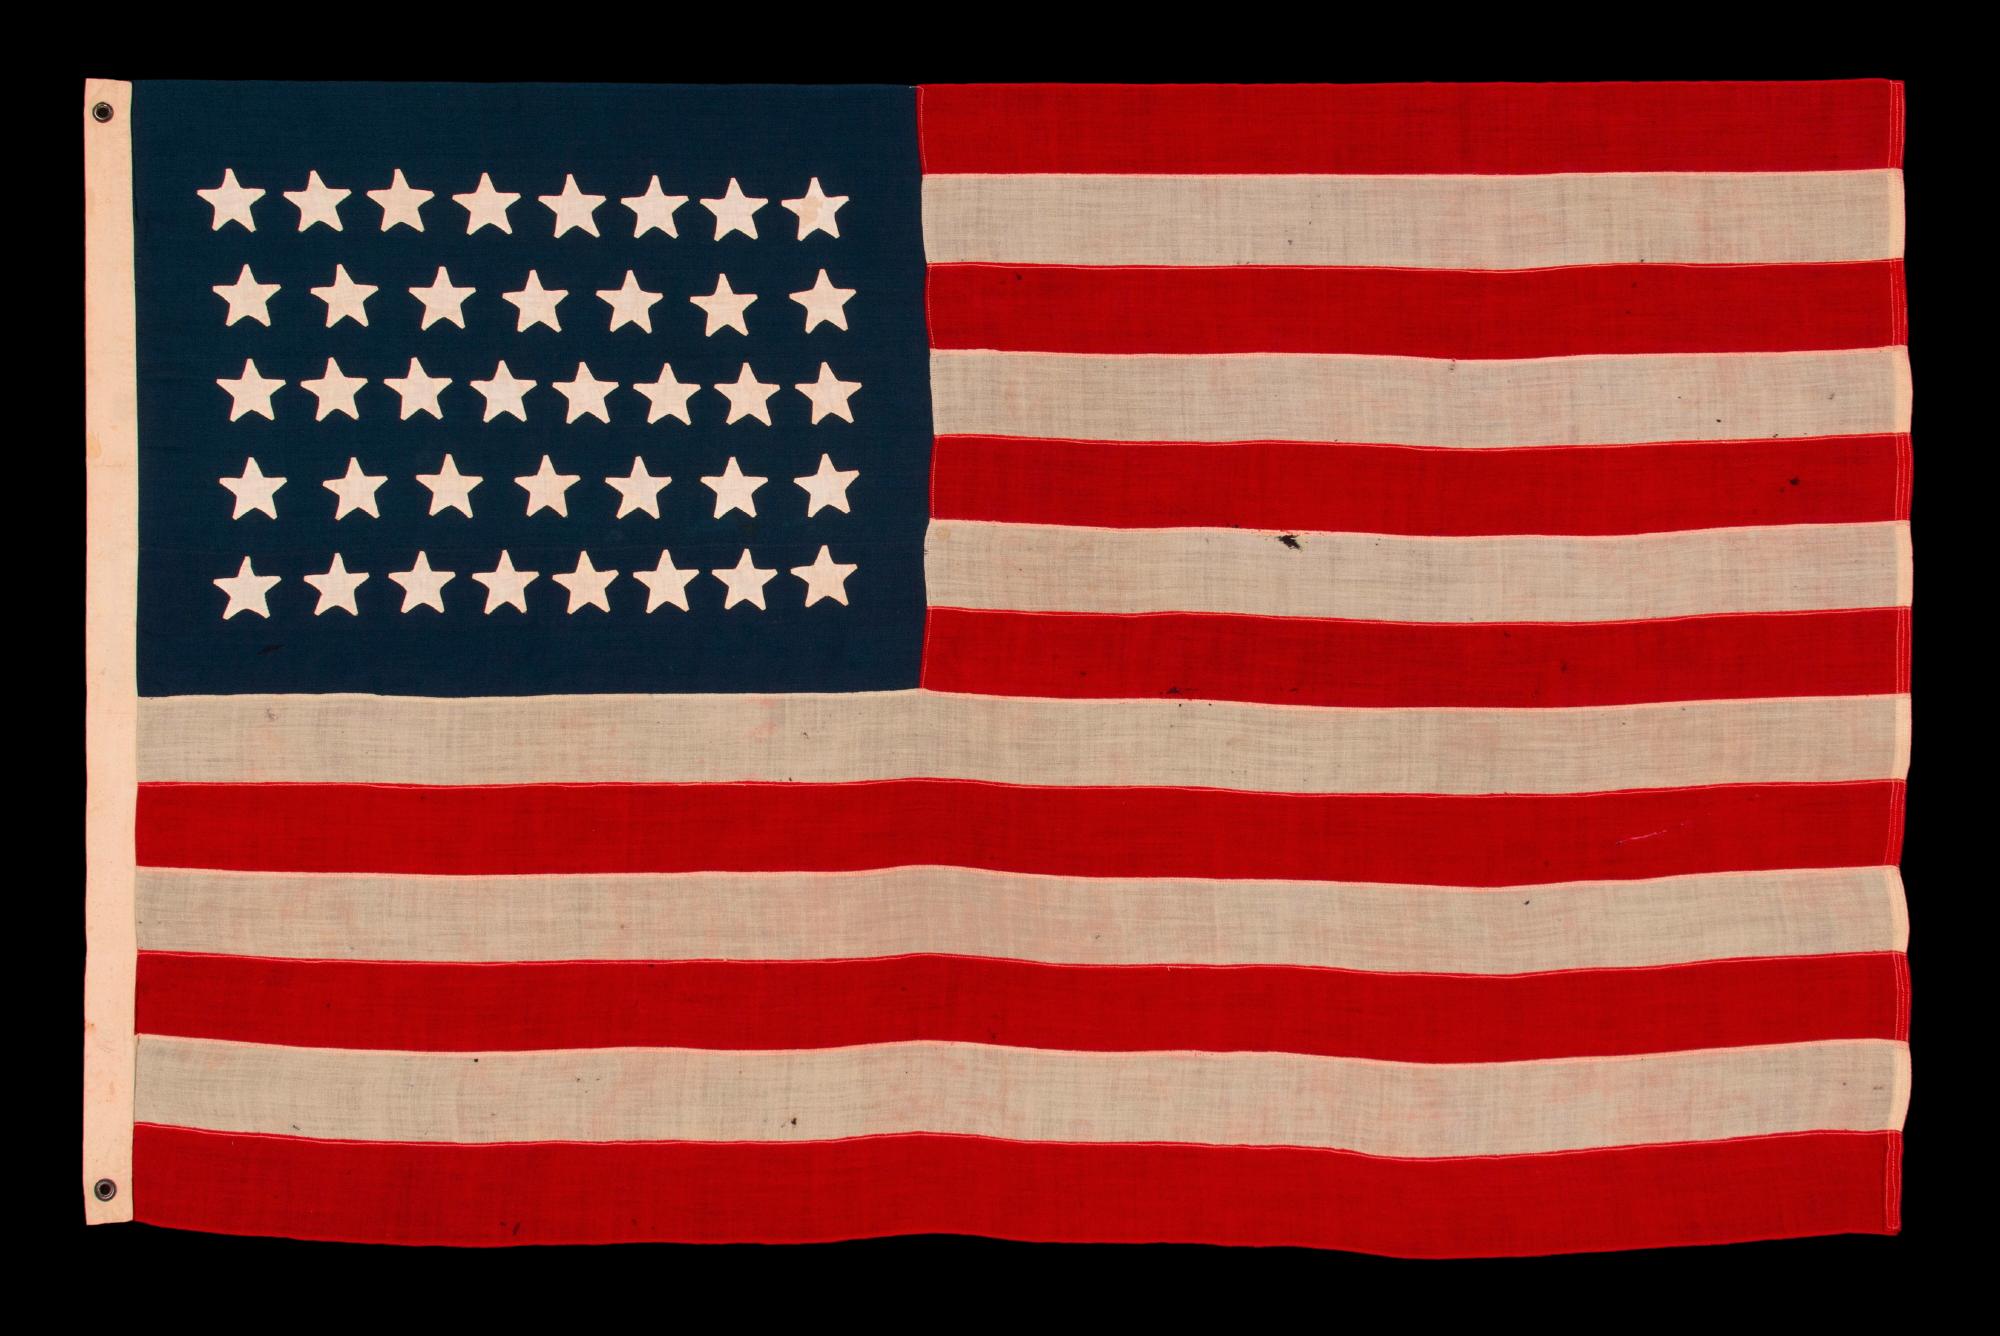 38 STAR ANTIQUE AMERICAN FLAG WITH HAND-SEWN STARS IN AN 8-7-8-7-8 PATTERN OF JUSTIFIED ROWS, MADE IN THE PERIOD WHEN COLORADO WAS THE MOST RECENT STATE TO JOIN THE UNION, 1876-1889

38 star American national flag, made in the period when Colorado